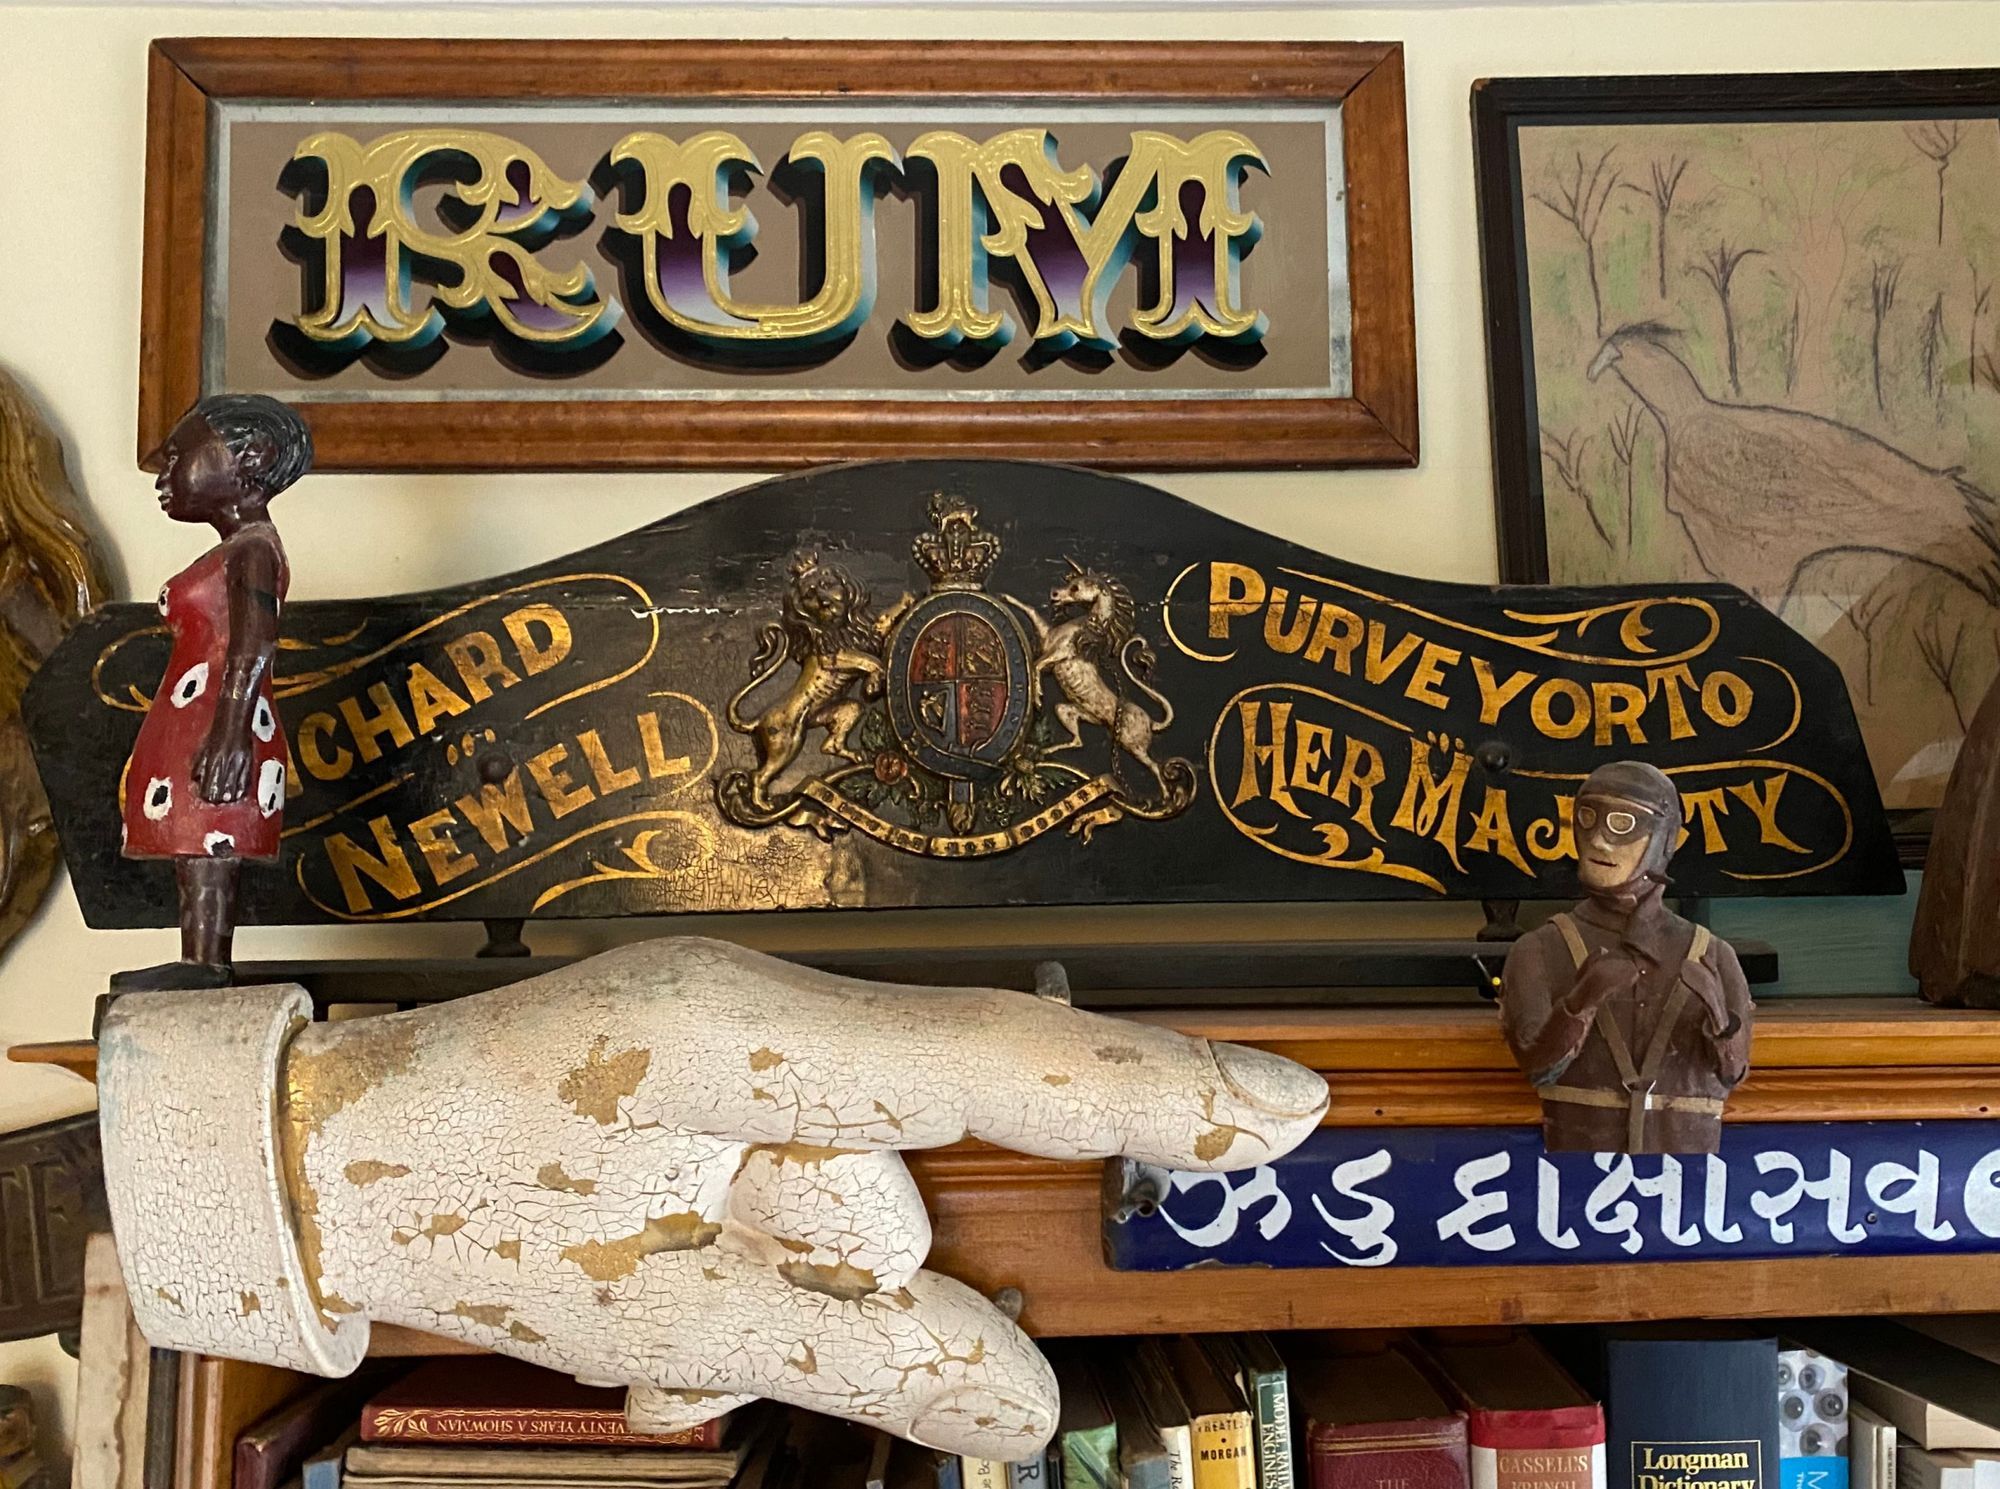 Various signs on display near the top of a bookshelf.